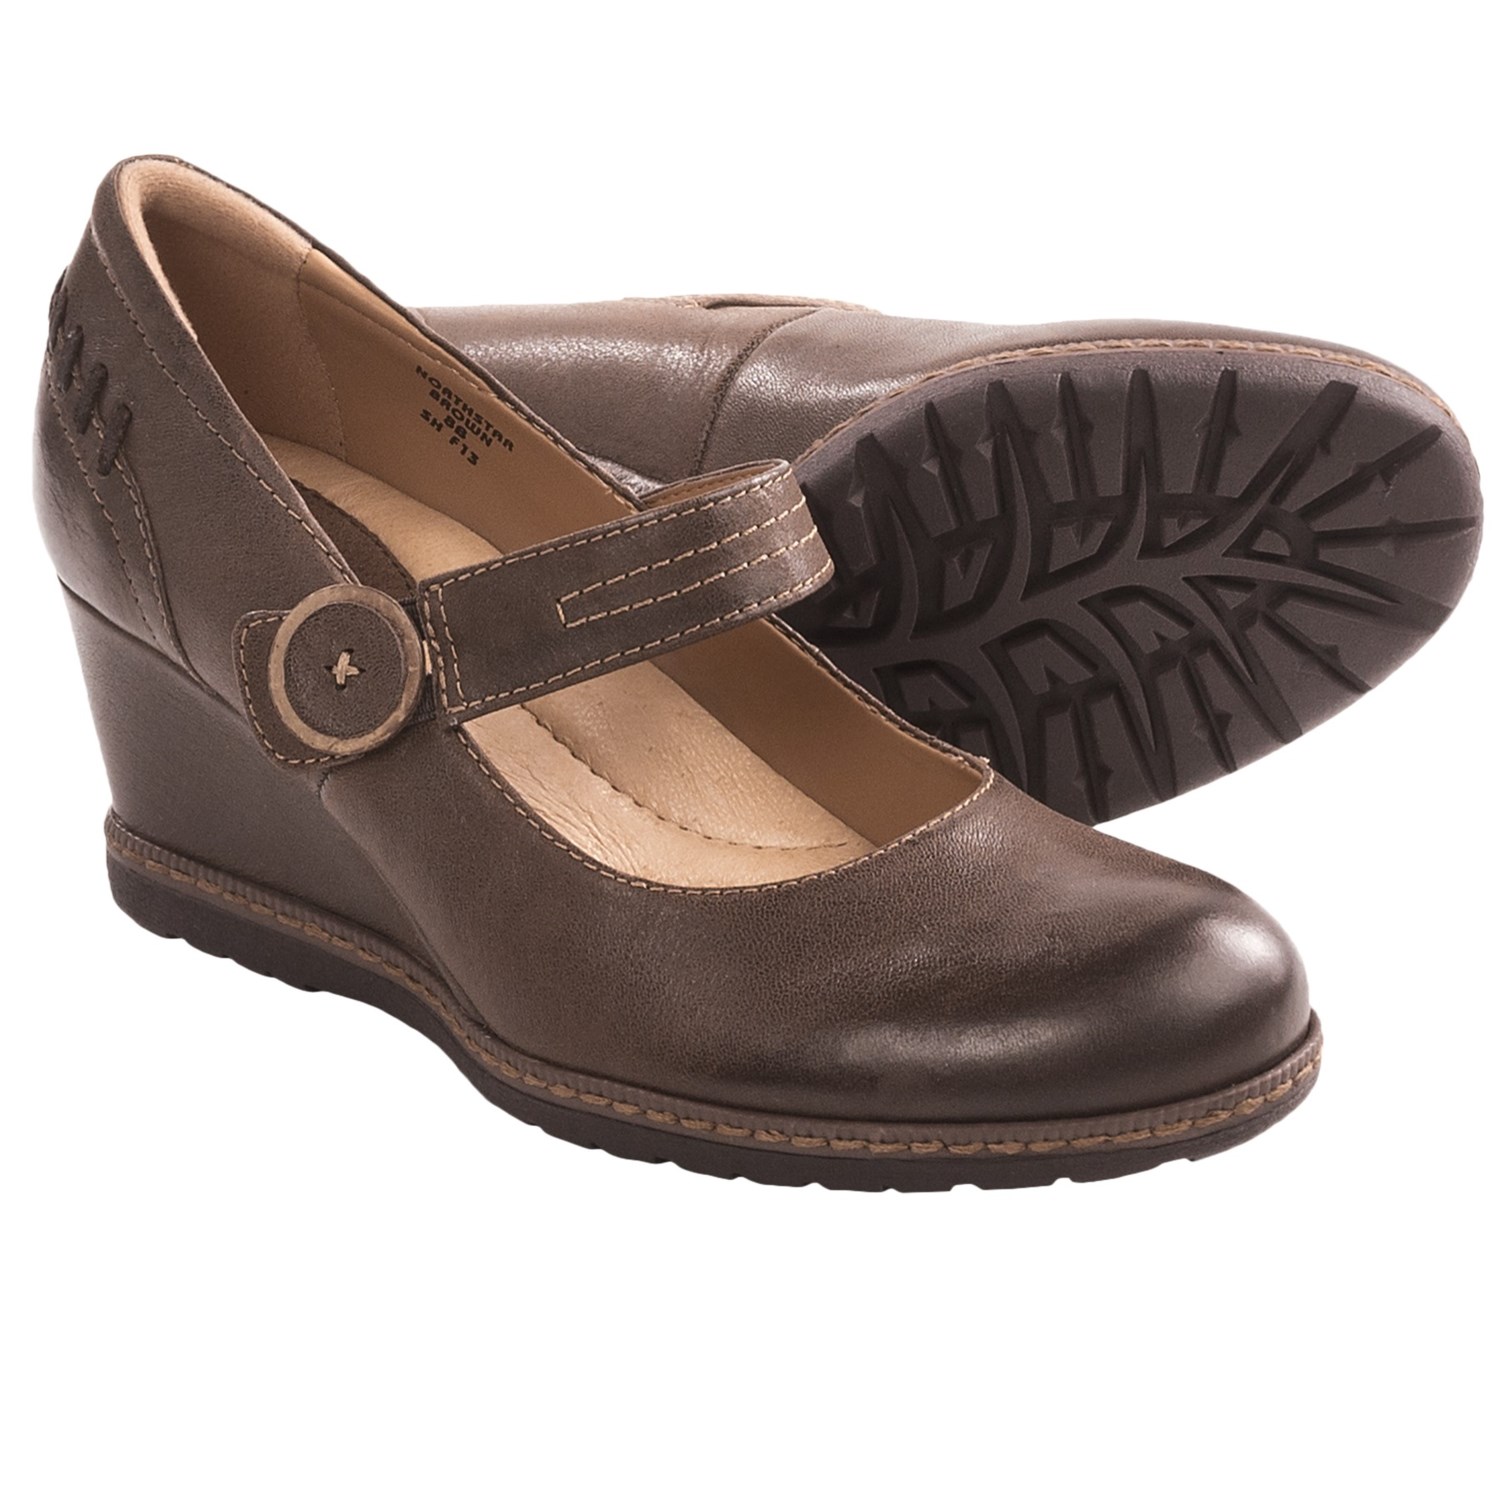 ... Northstar Wedge Mary Jane Shoes - Leather (For Women) in Brown Leather